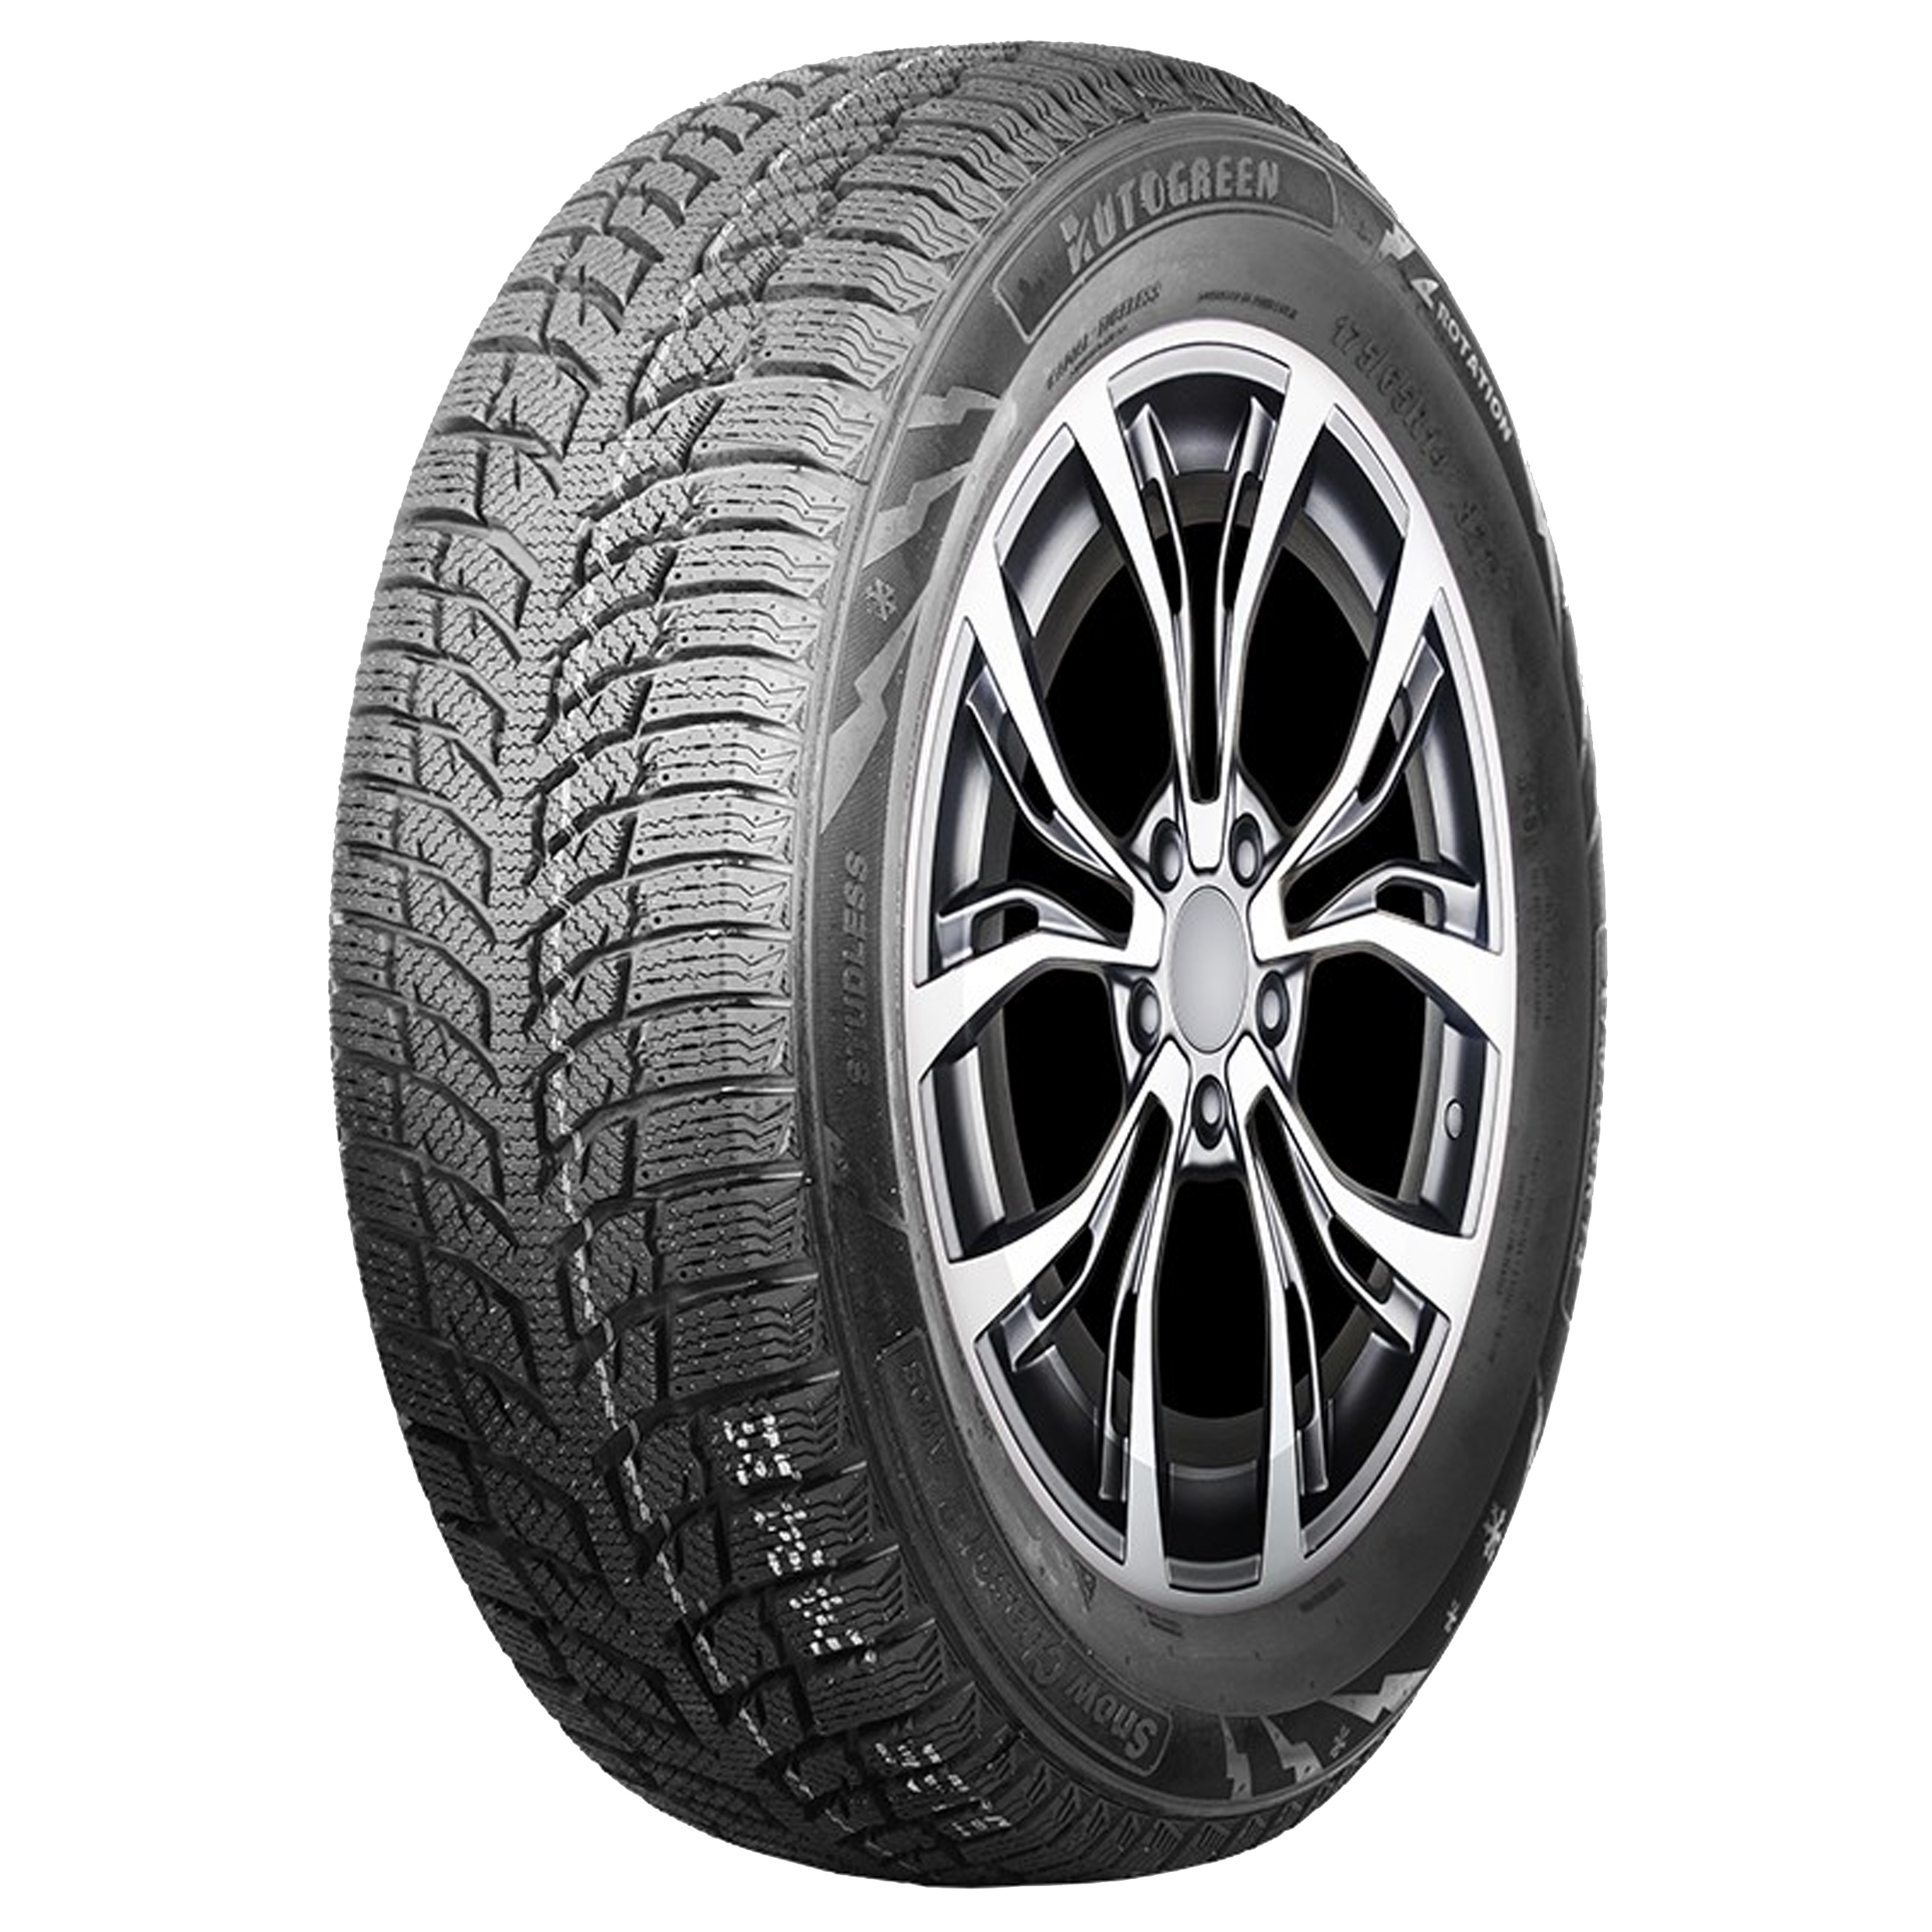 225/40R18 opona AUTOGREEN Snow Chaser 2 AW08 XL 92H